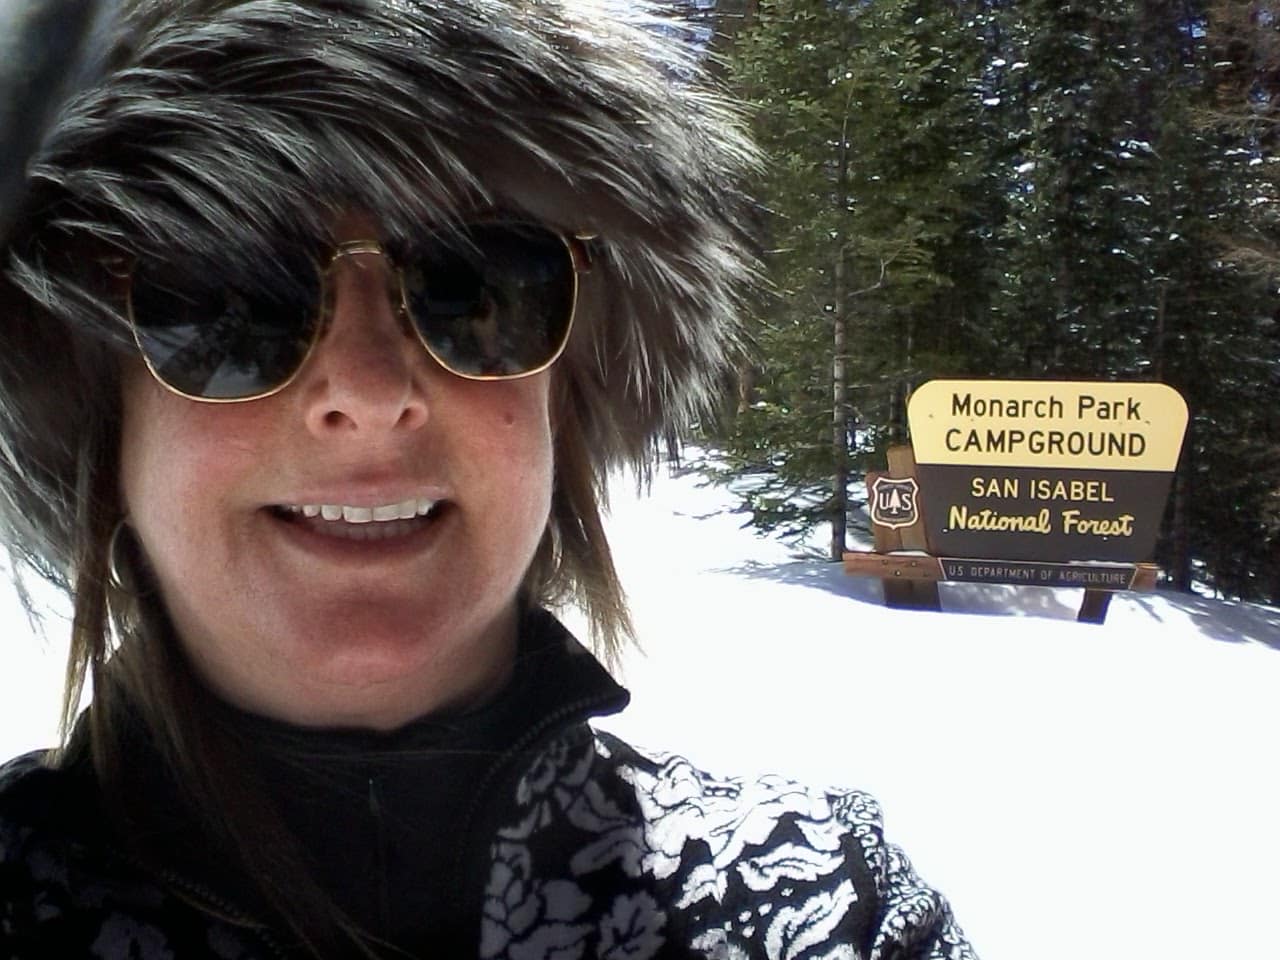 Cross country skiier with a fur mink hat enjoying the spring weather.